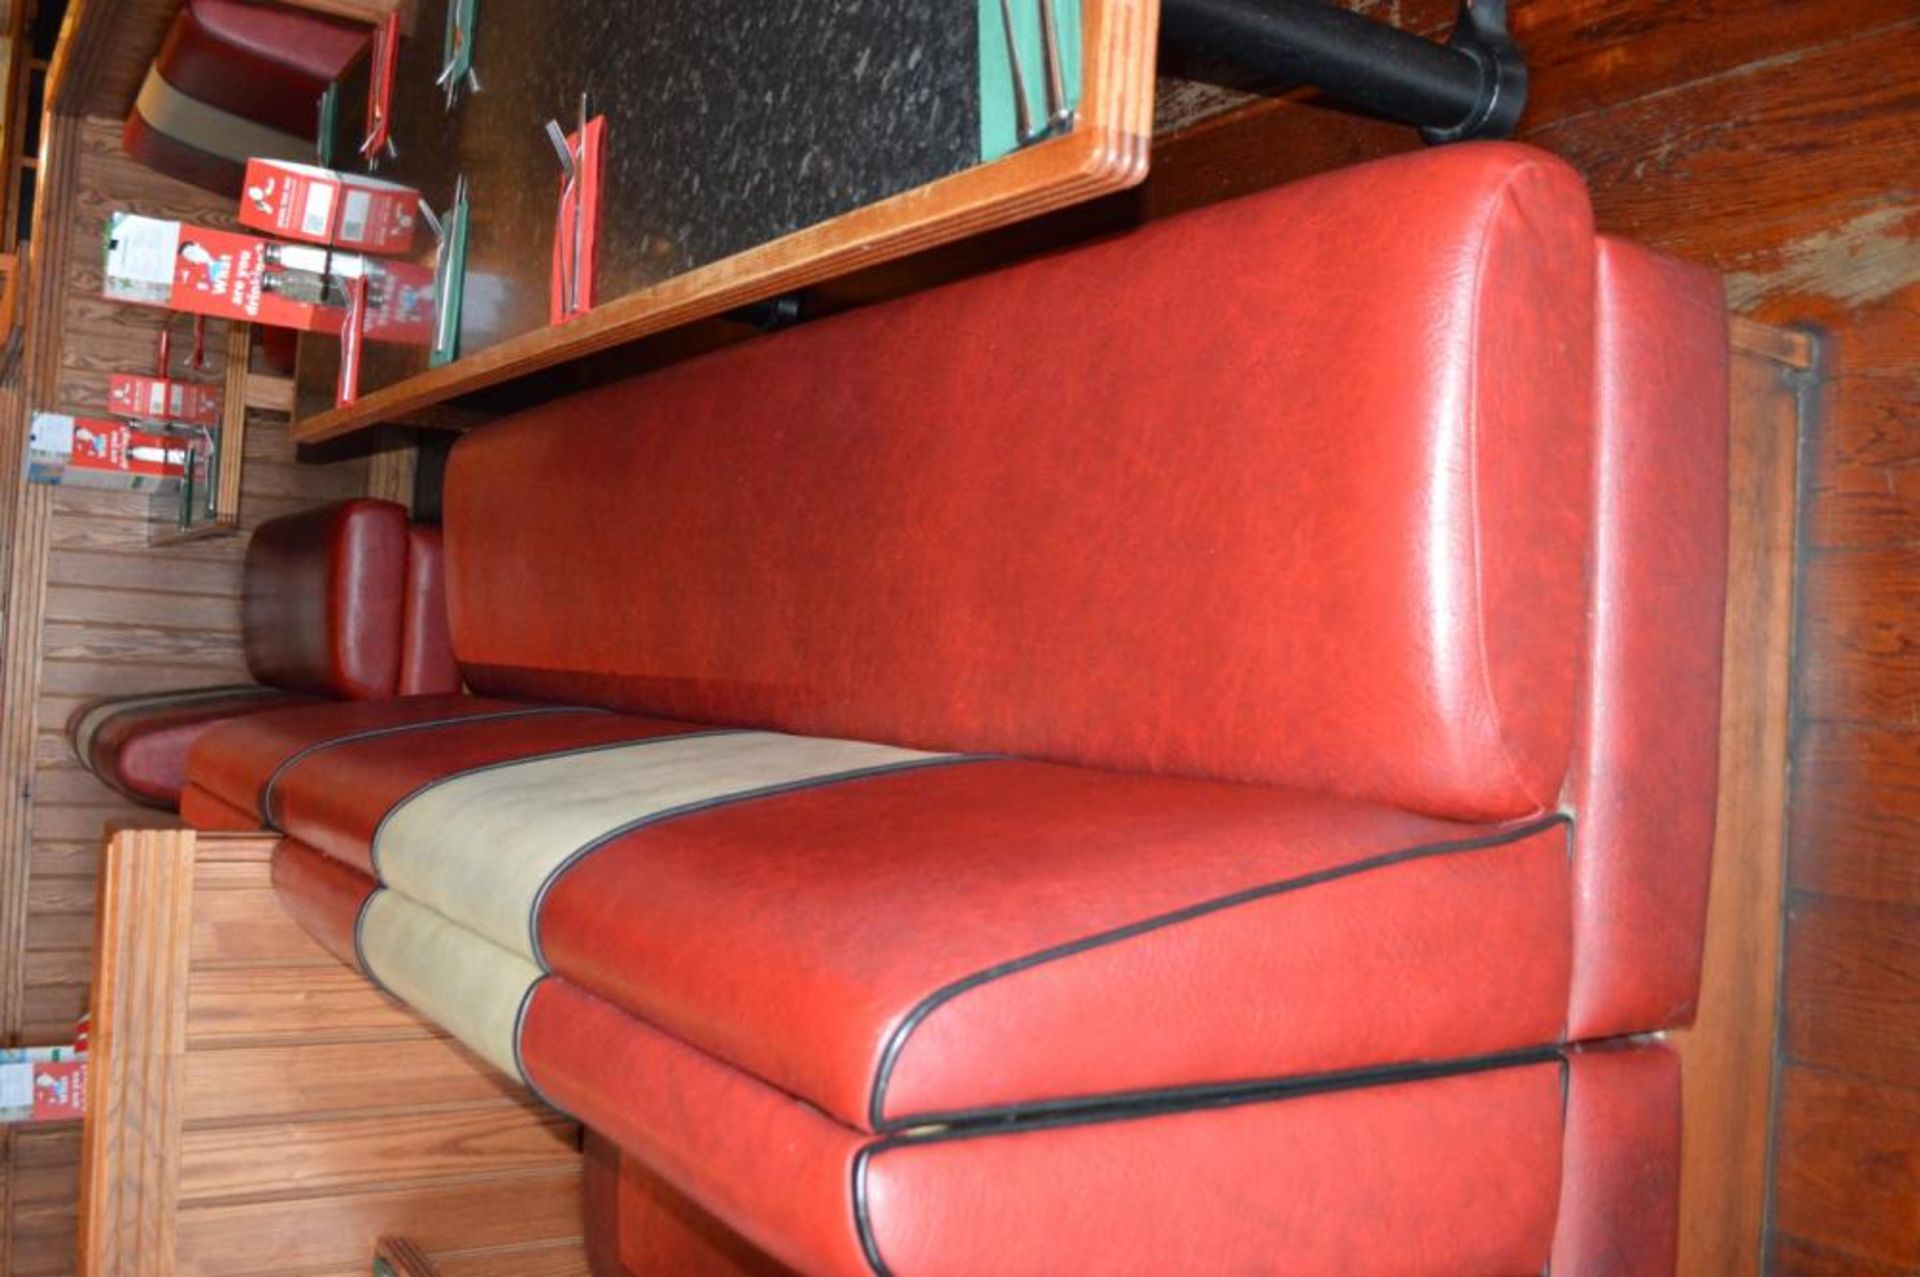 1 x Selection of Cosy Bespoke Seating Booths in a 1950's Retro American Diner Design With Dining Tab - Image 12 of 30